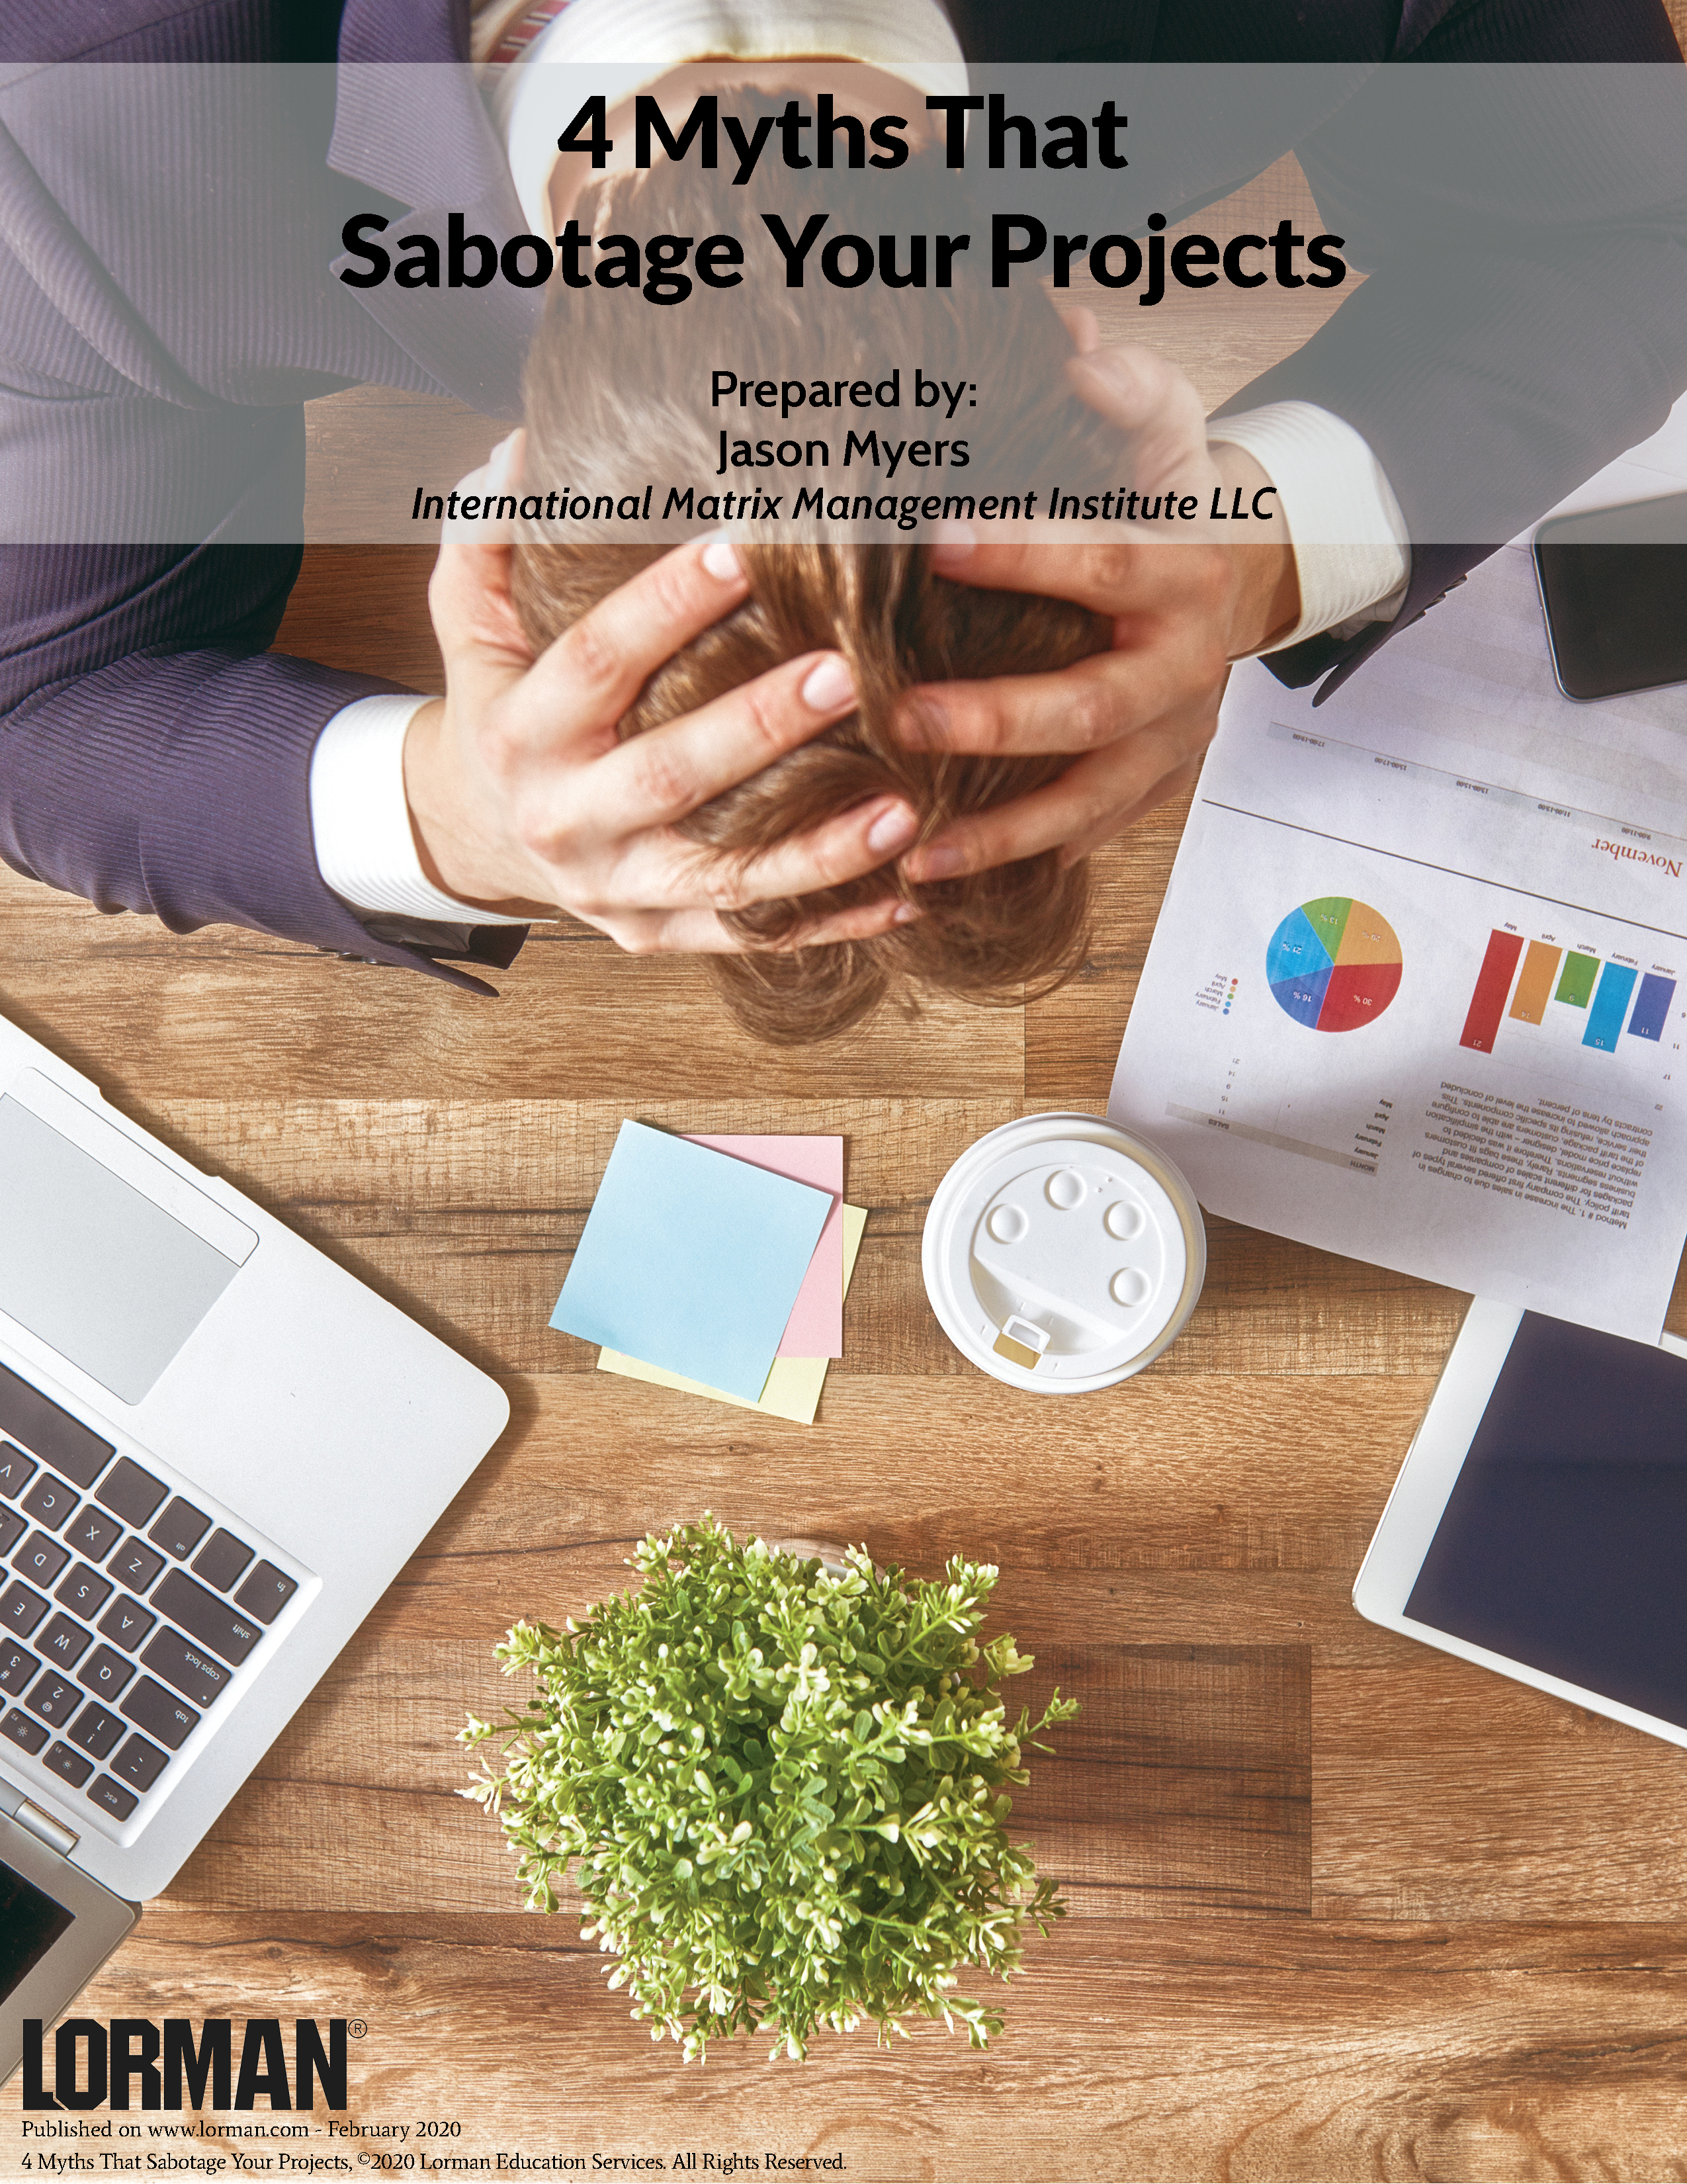 4 Myths That Sabotage Your Projects